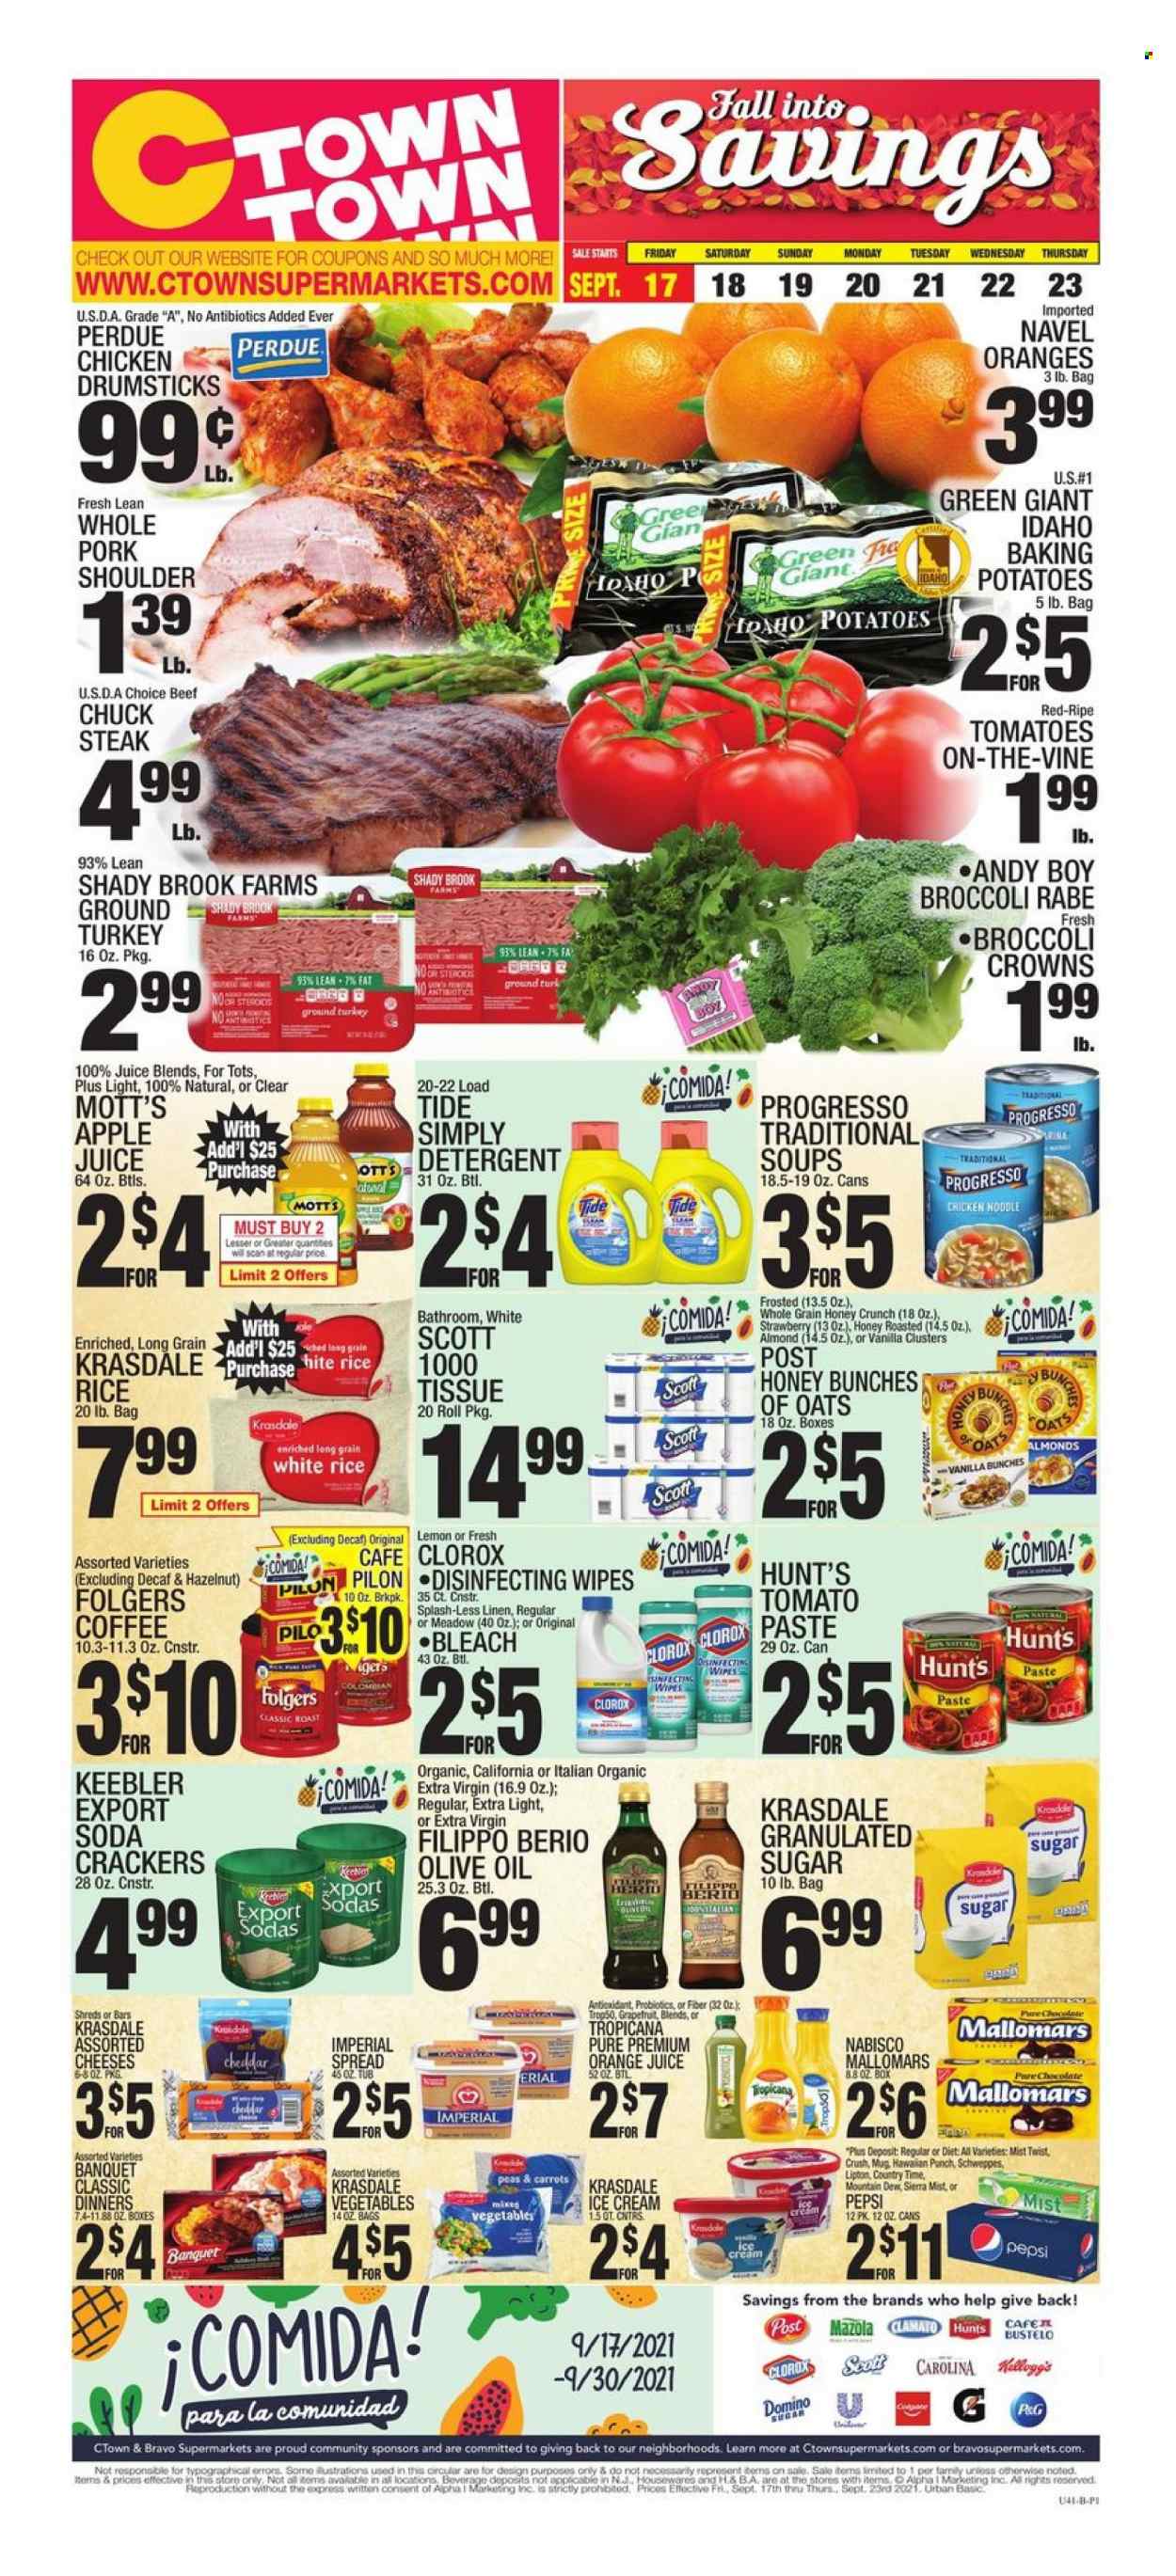 thumbnail - C-Town Flyer - 09/17/2021 - 09/23/2021 - Sales products - carrots, tomatoes, potatoes, broccolini, Mott's, Progresso, Perdue®, cheddar, cheese, ice cream, crackers, Keebler, granulated sugar, sugar, oats, rice, white rice, extra virgin olive oil, olive oil, oil, apple juice, Mountain Dew, Schweppes, Pepsi, orange juice, juice, Lipton, Clamato, Sierra Mist, Country Time, soda, coffee, Folgers, punch, ground turkey, chicken drumsticks, beef meat, steak, chuck steak, pork meat, pork shoulder, navel oranges. Page 1.